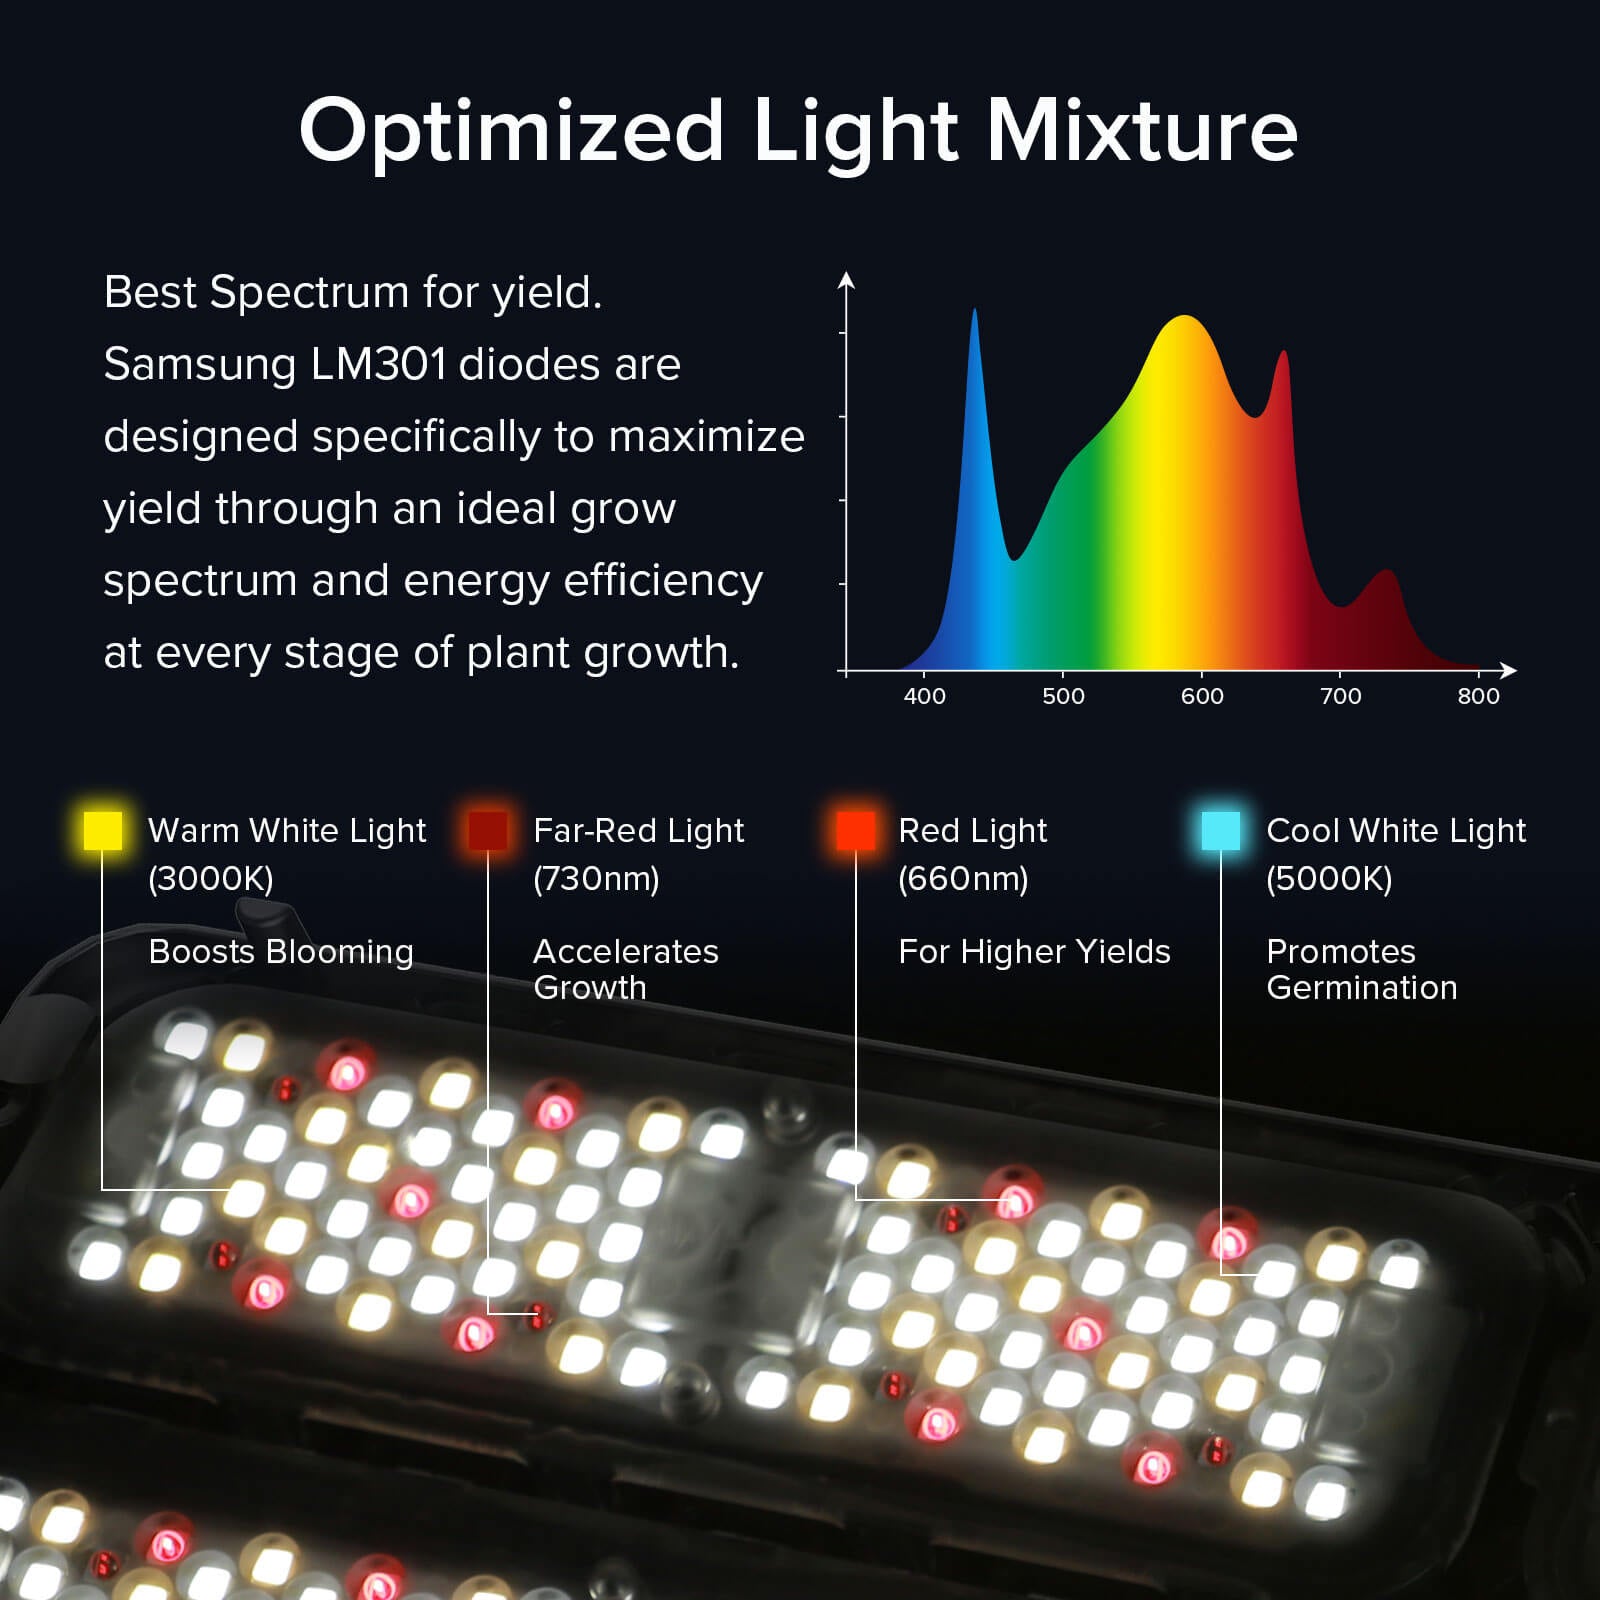 Dimmable 200W/400W led grow light for Grow Tent has best spectrum for yield